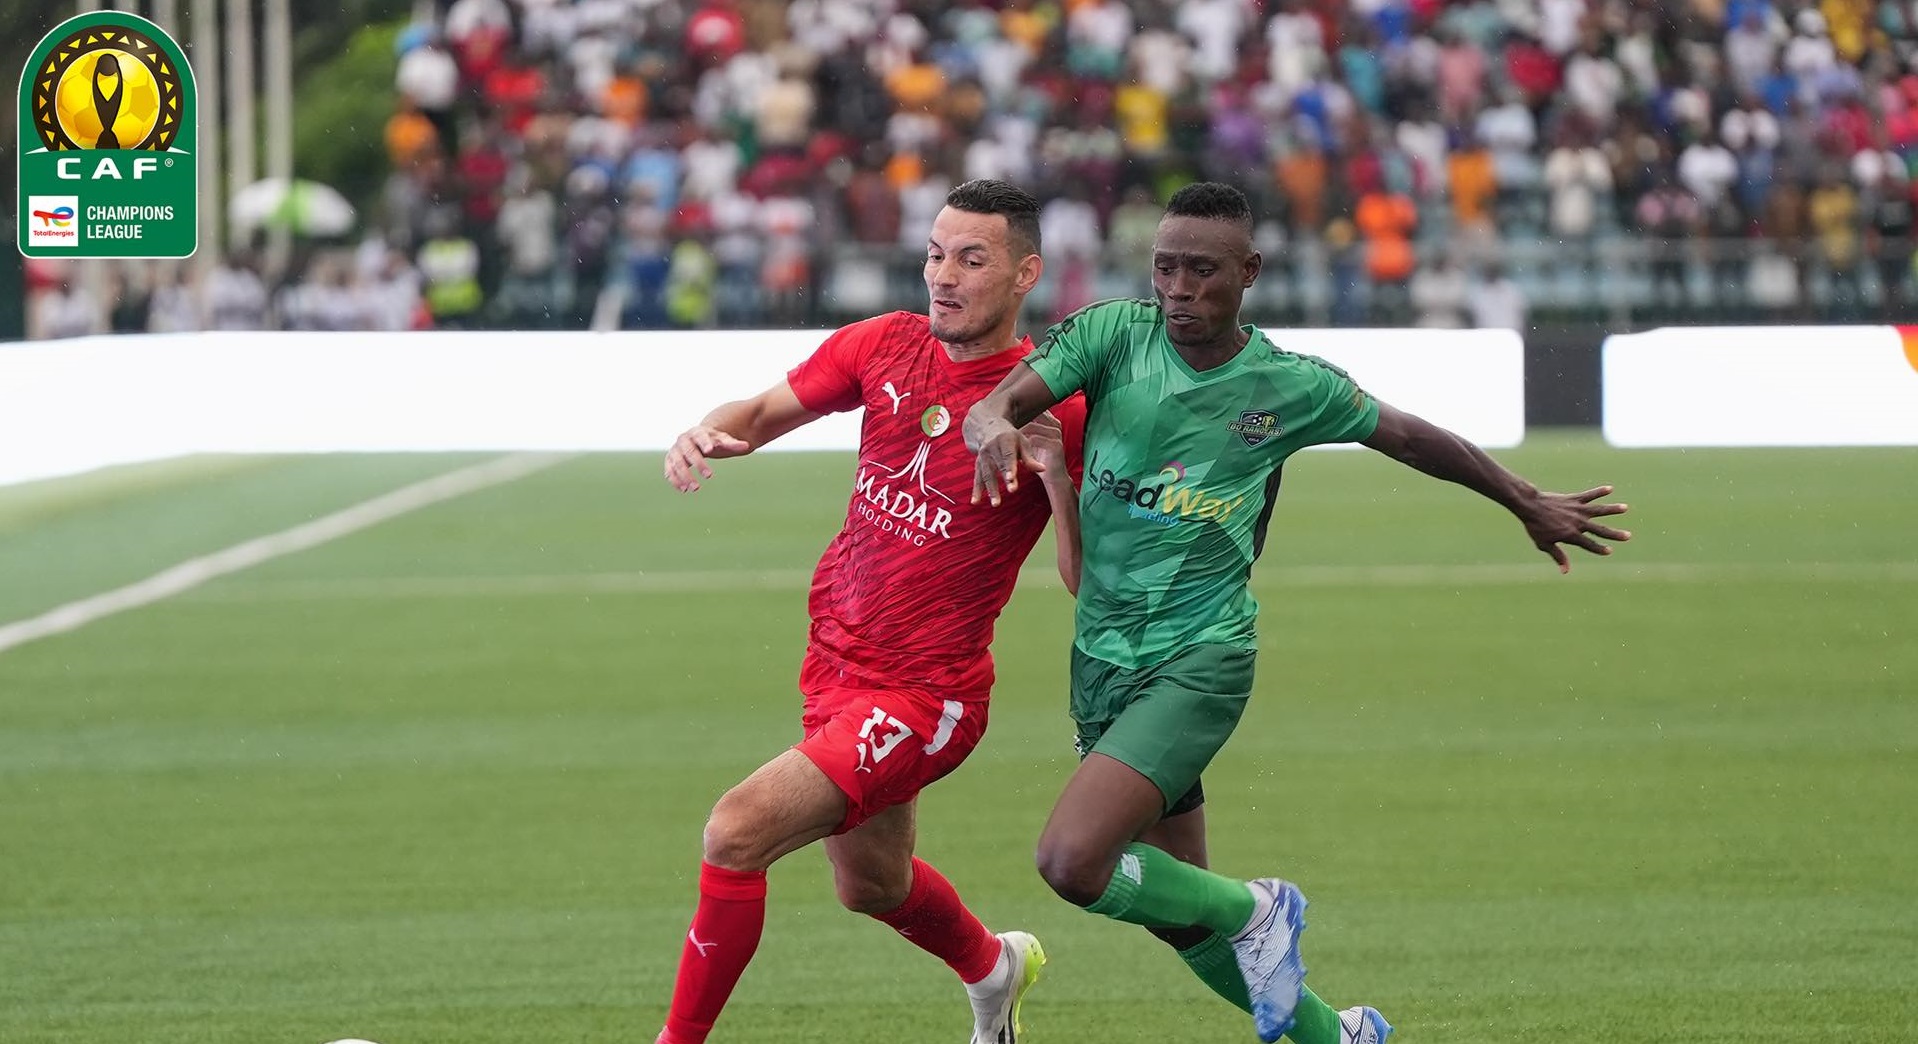 CAF Champions League Qualifier: Bo Rangers Loses Home Game to CR Belouizdad